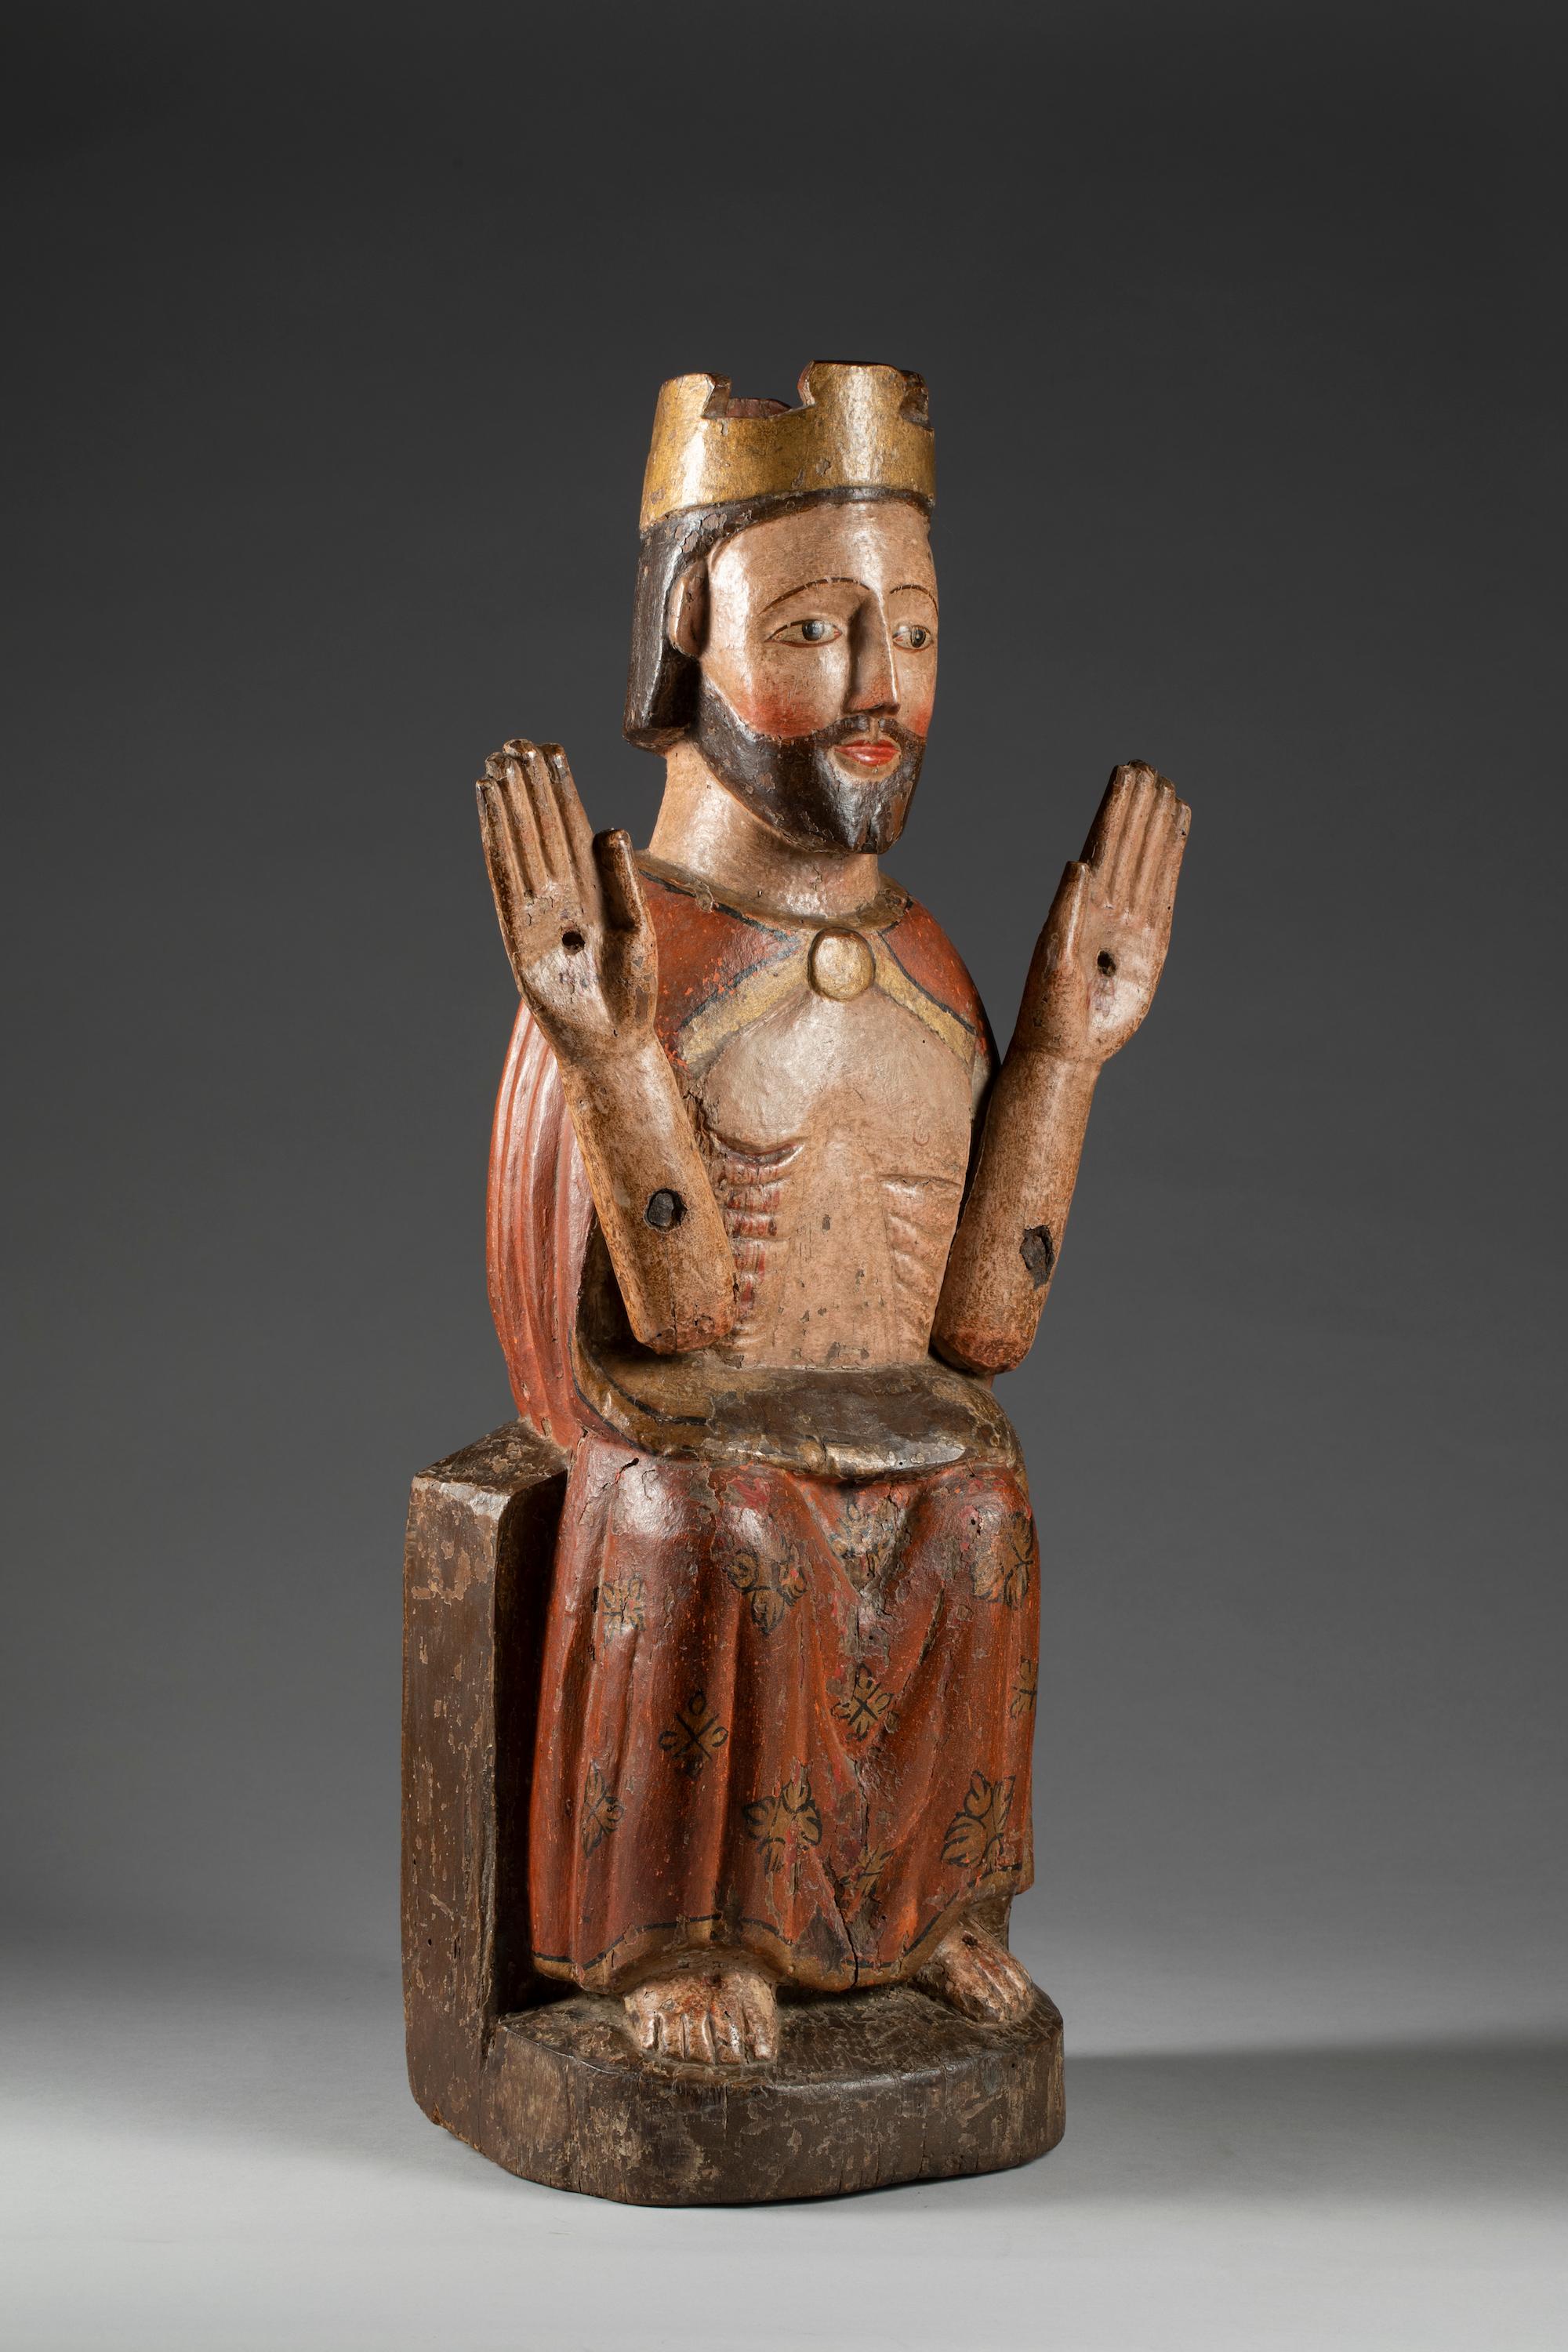 Christ enthroned

South America, 17th century

cm 64x22x18,5

Polychrome wooden sculpture representing Christ, wrapped in a red cloak edged with gold, who, crowned and seated on a throne, shows the stigmata of the hands of the feet and the wound of